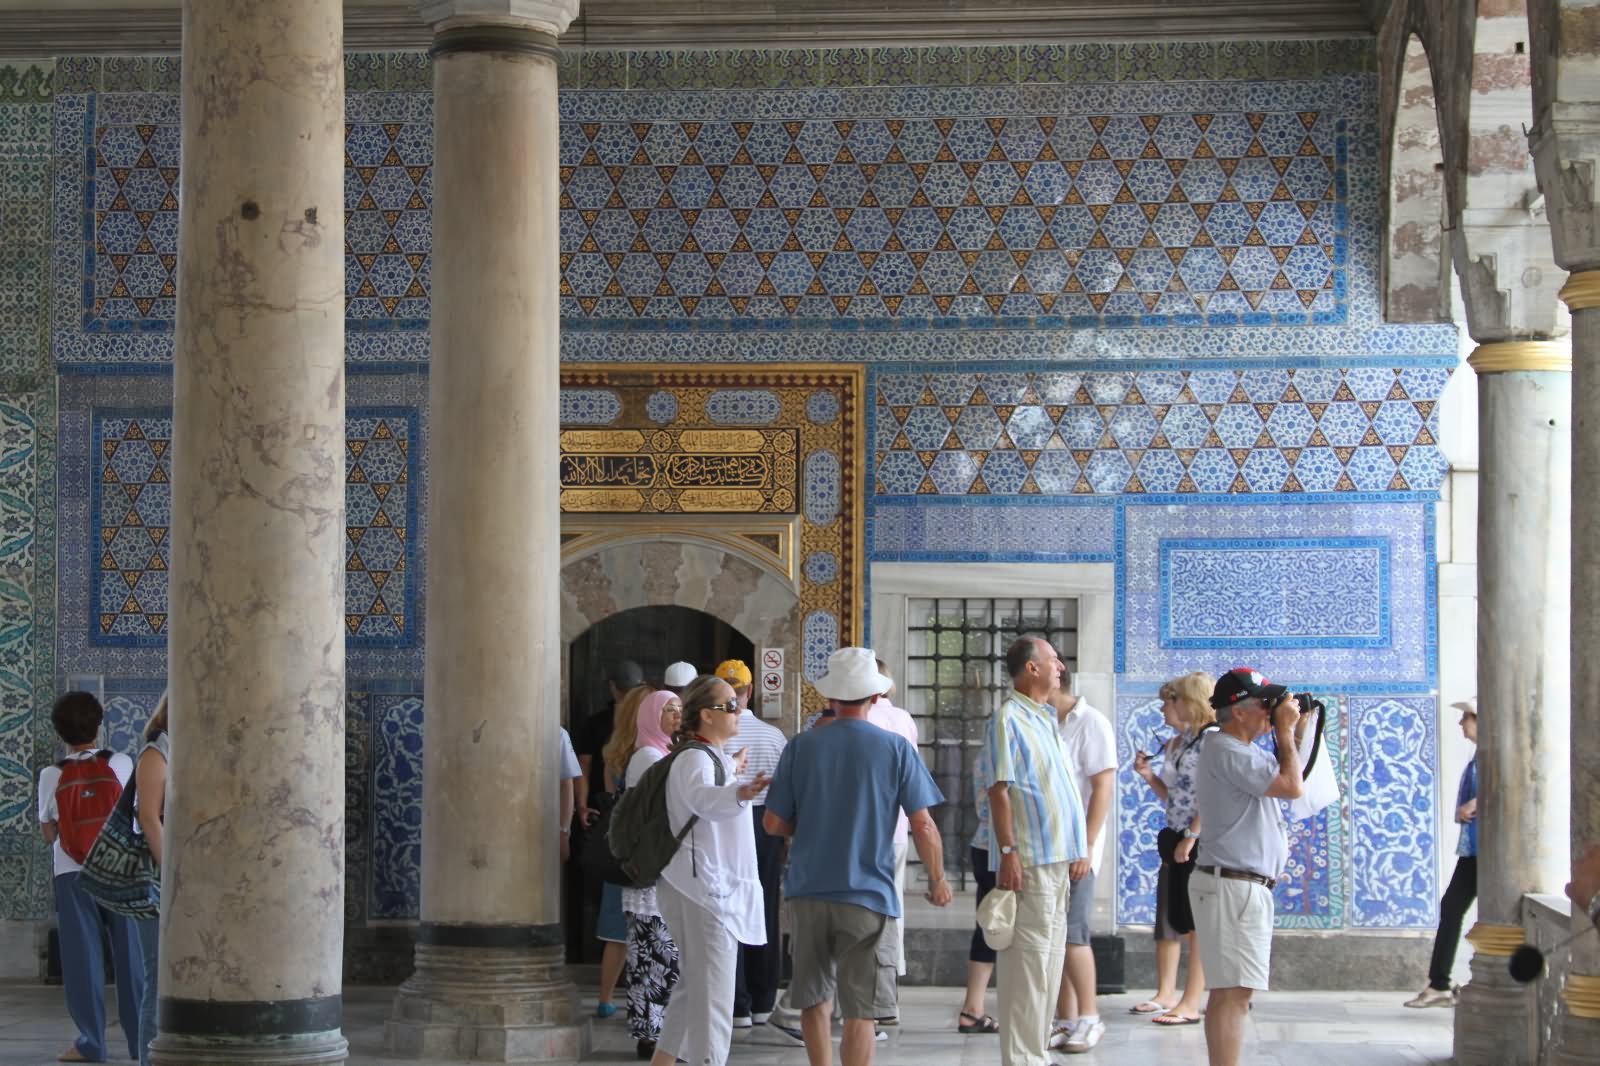 Entrance To The Circumcision Room At The Topkapi Palace